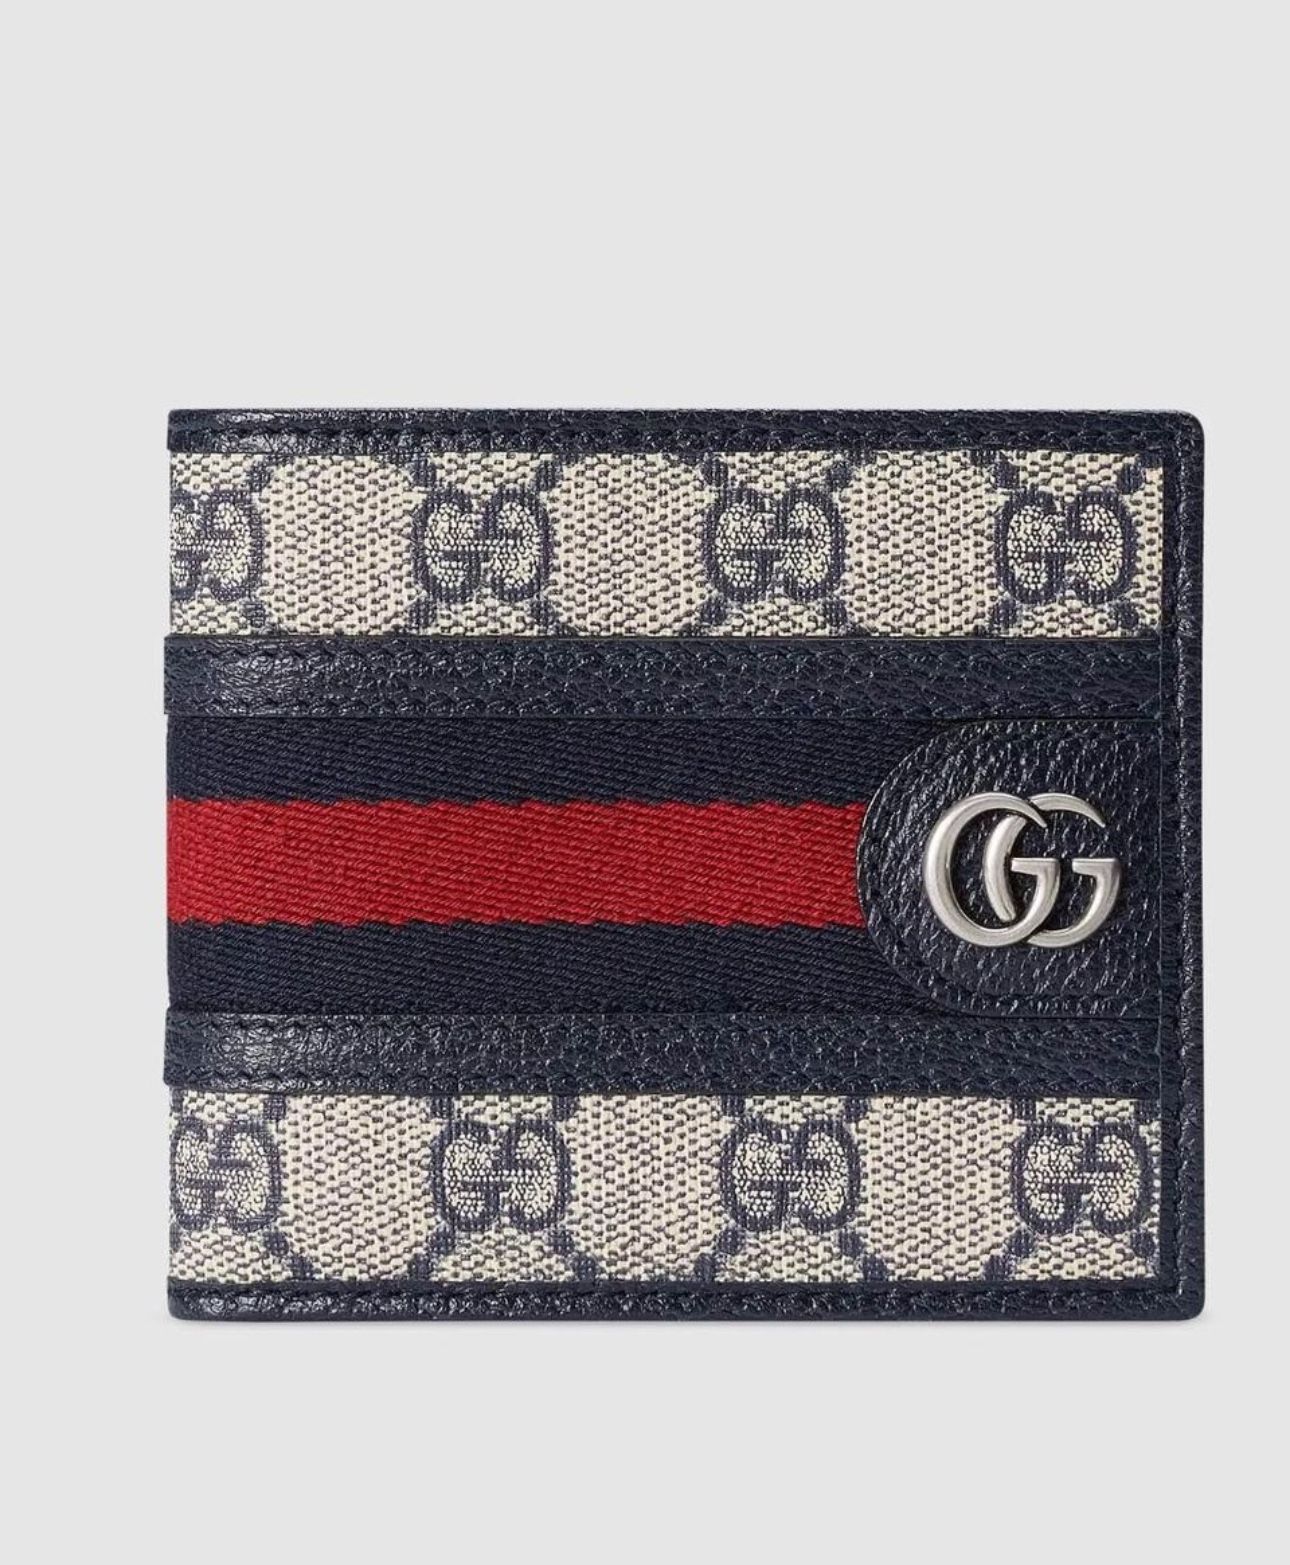 New Men’s Gucci Leather Trimmed Ophidia GG Wallet Blue Color